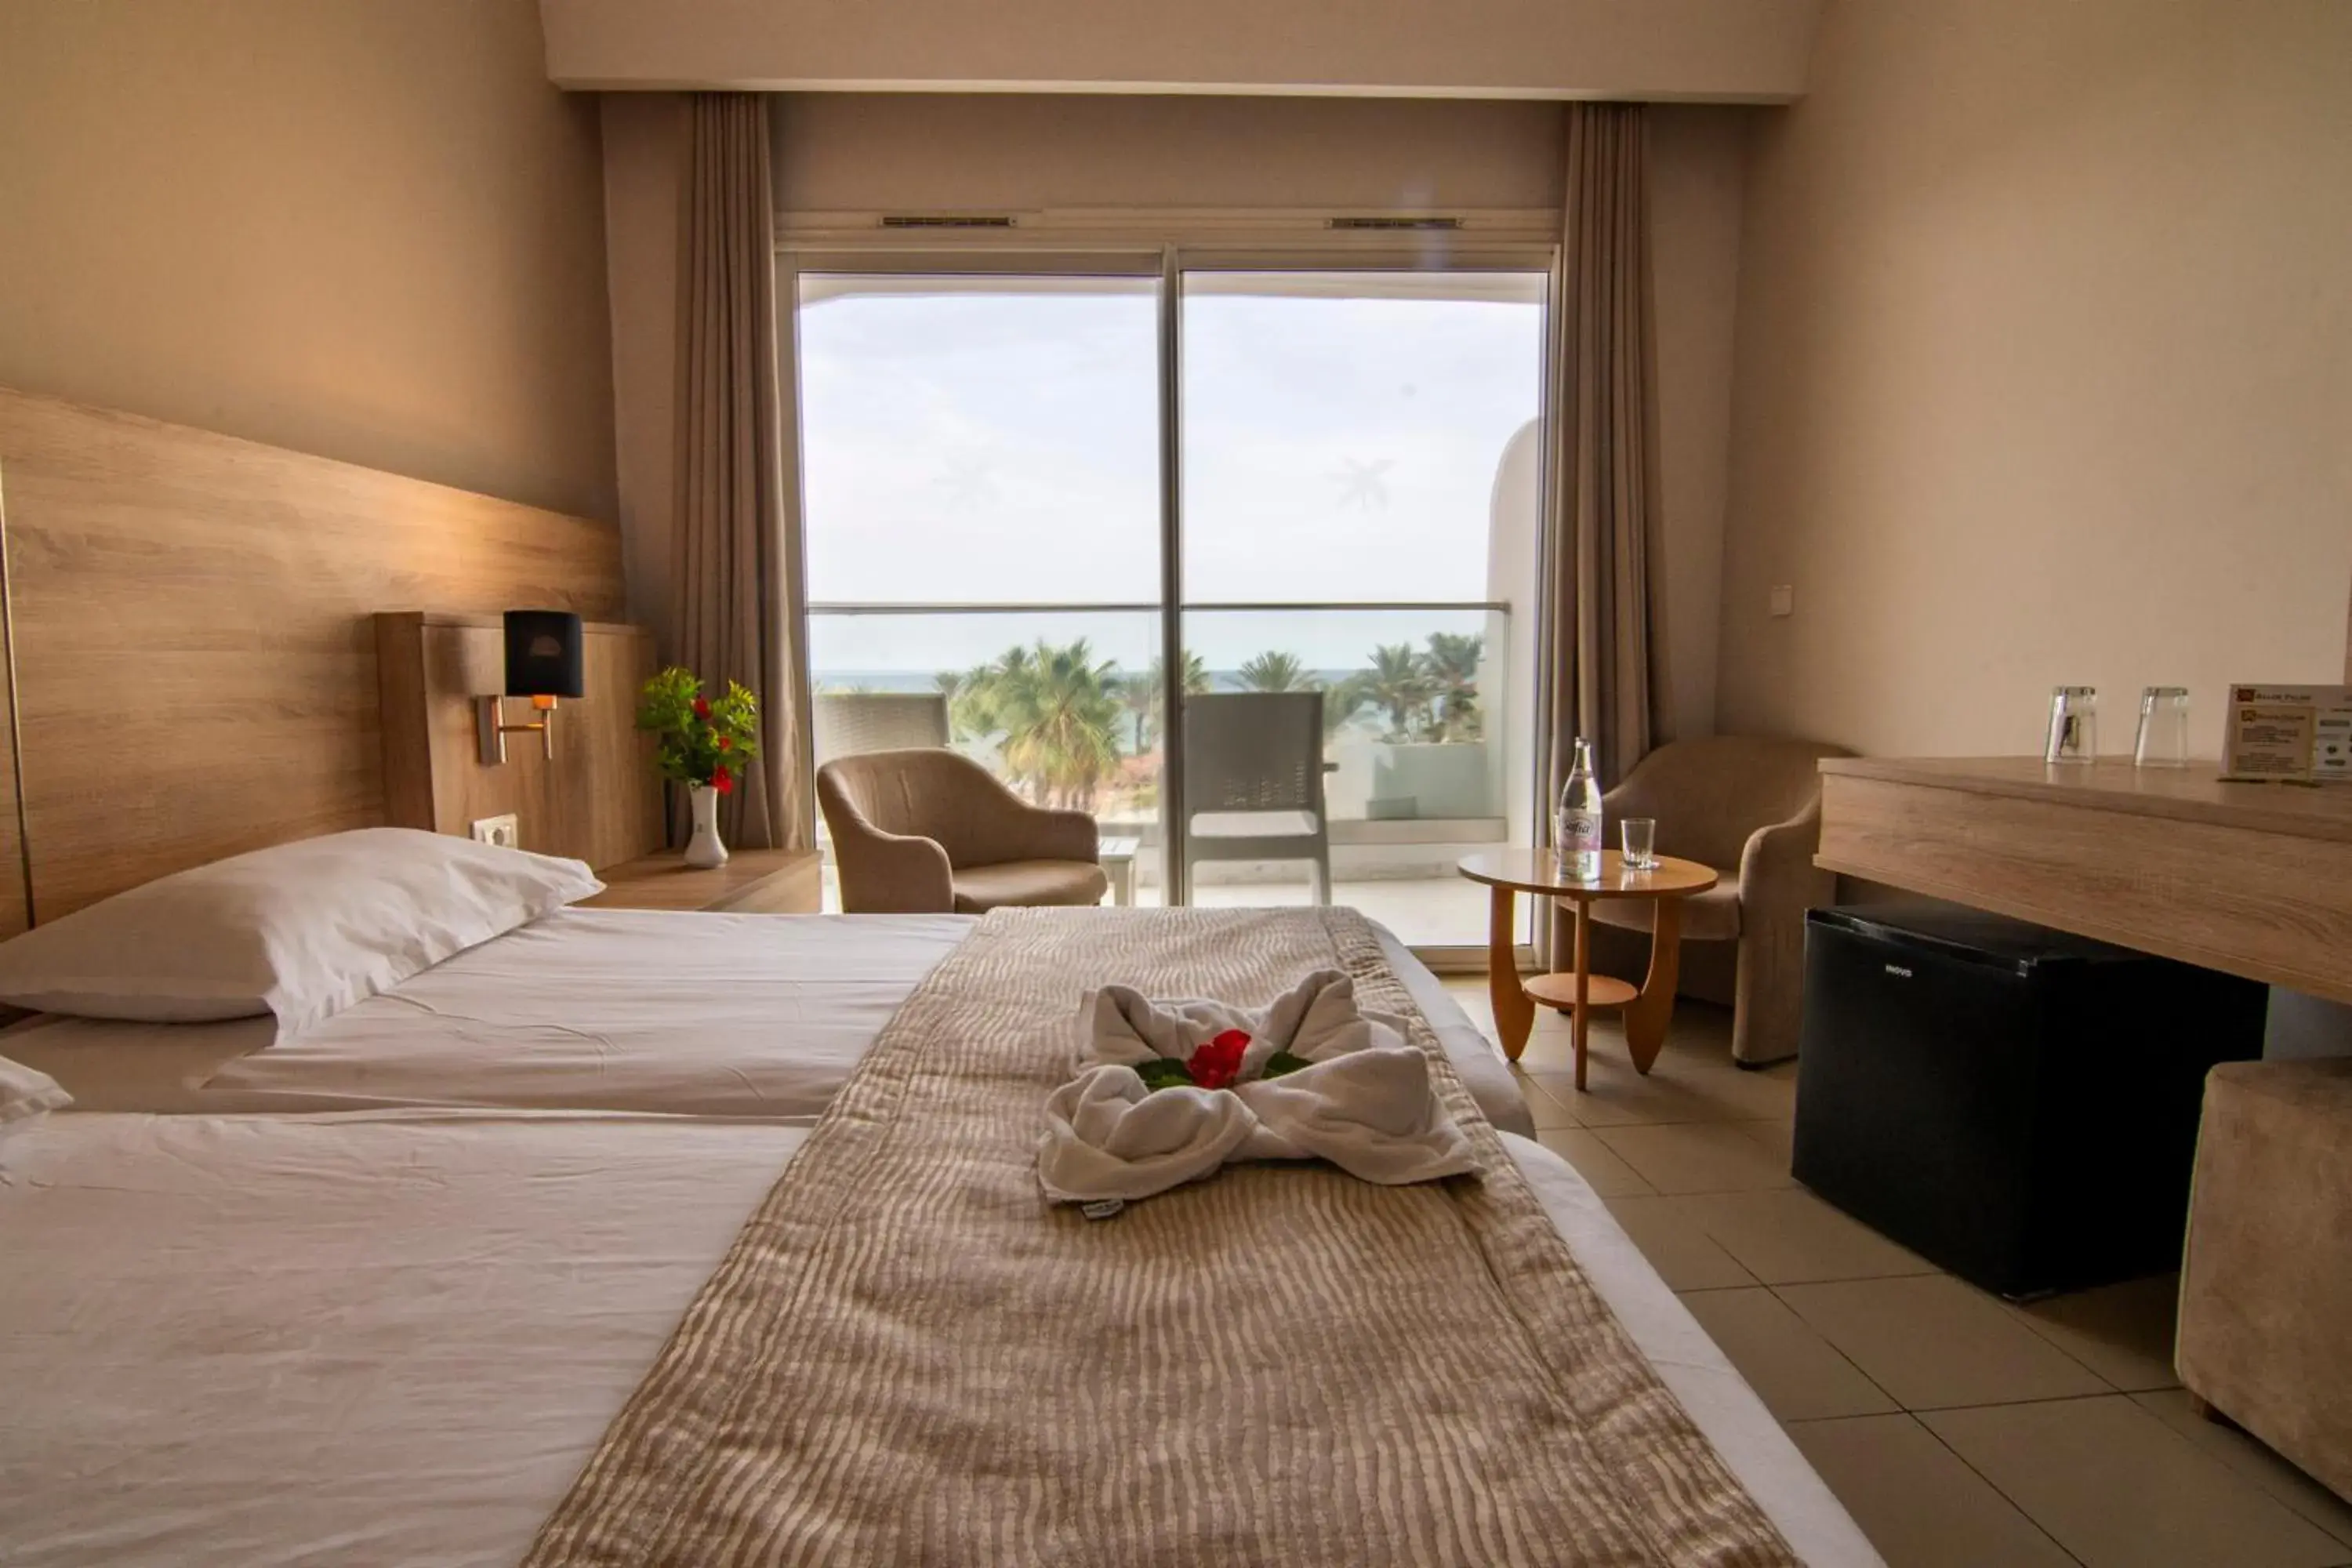 Bed, Room Photo in Riadh Palms- Resort & Spa